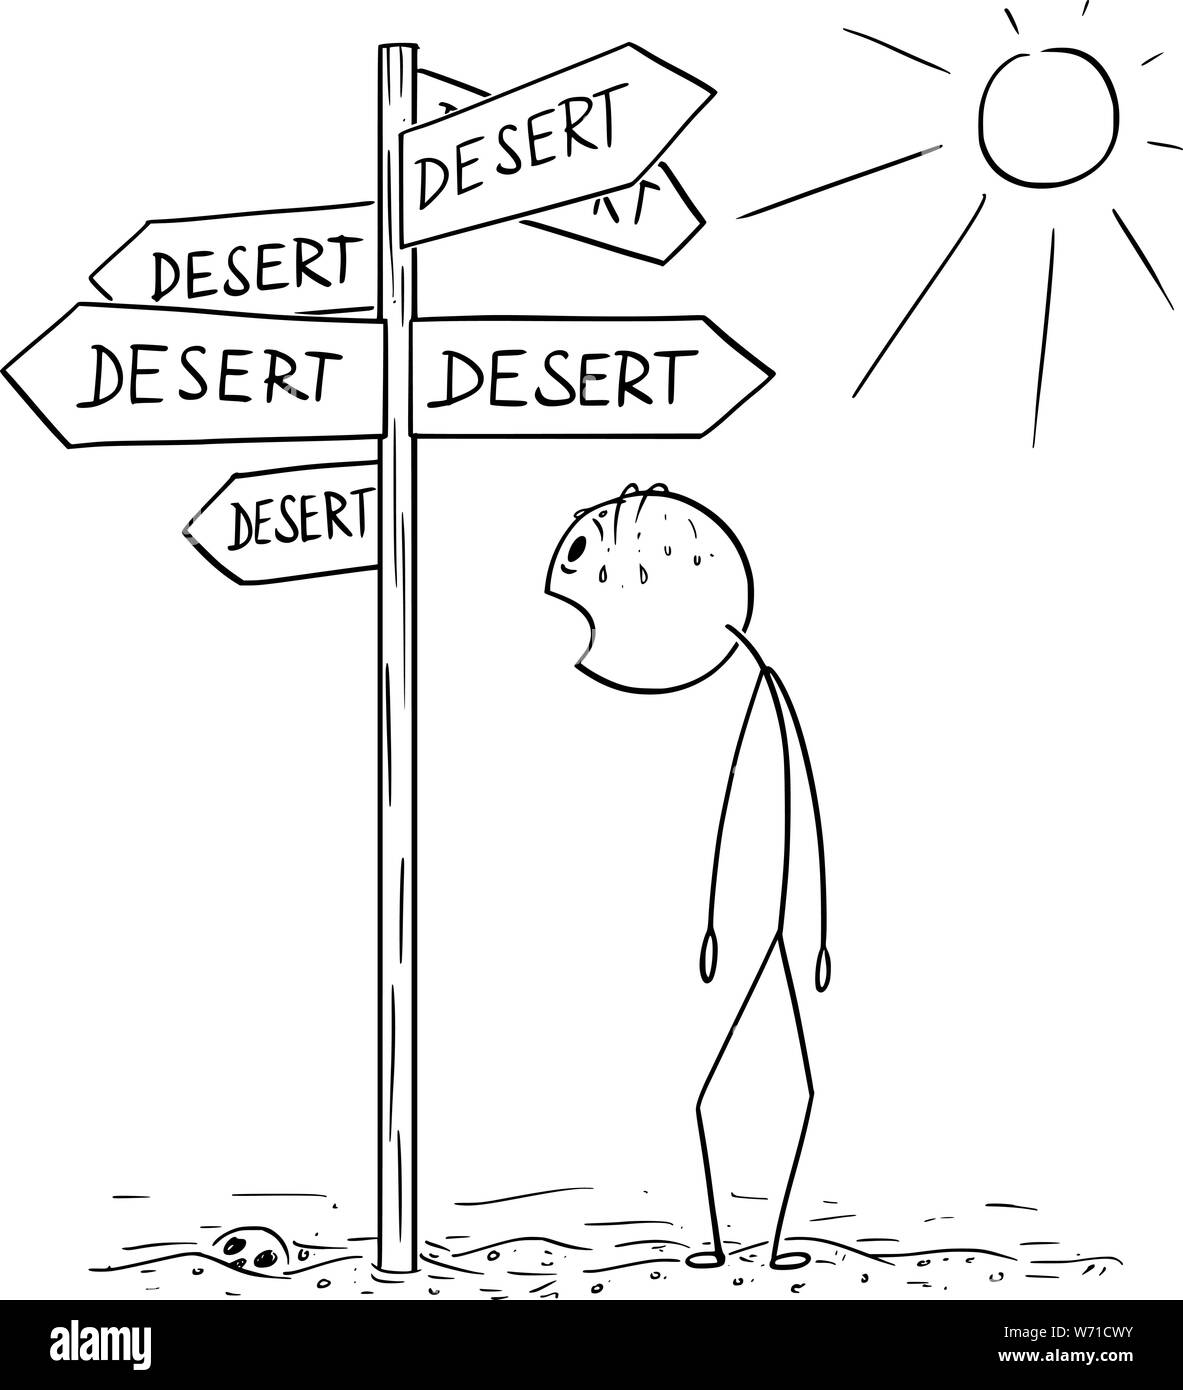 Vector cartoon stick figure drawing conceptual illustration of exhausted and thirsty man walking on hot desert and found signpost showing desert in many directions. Stock Vector